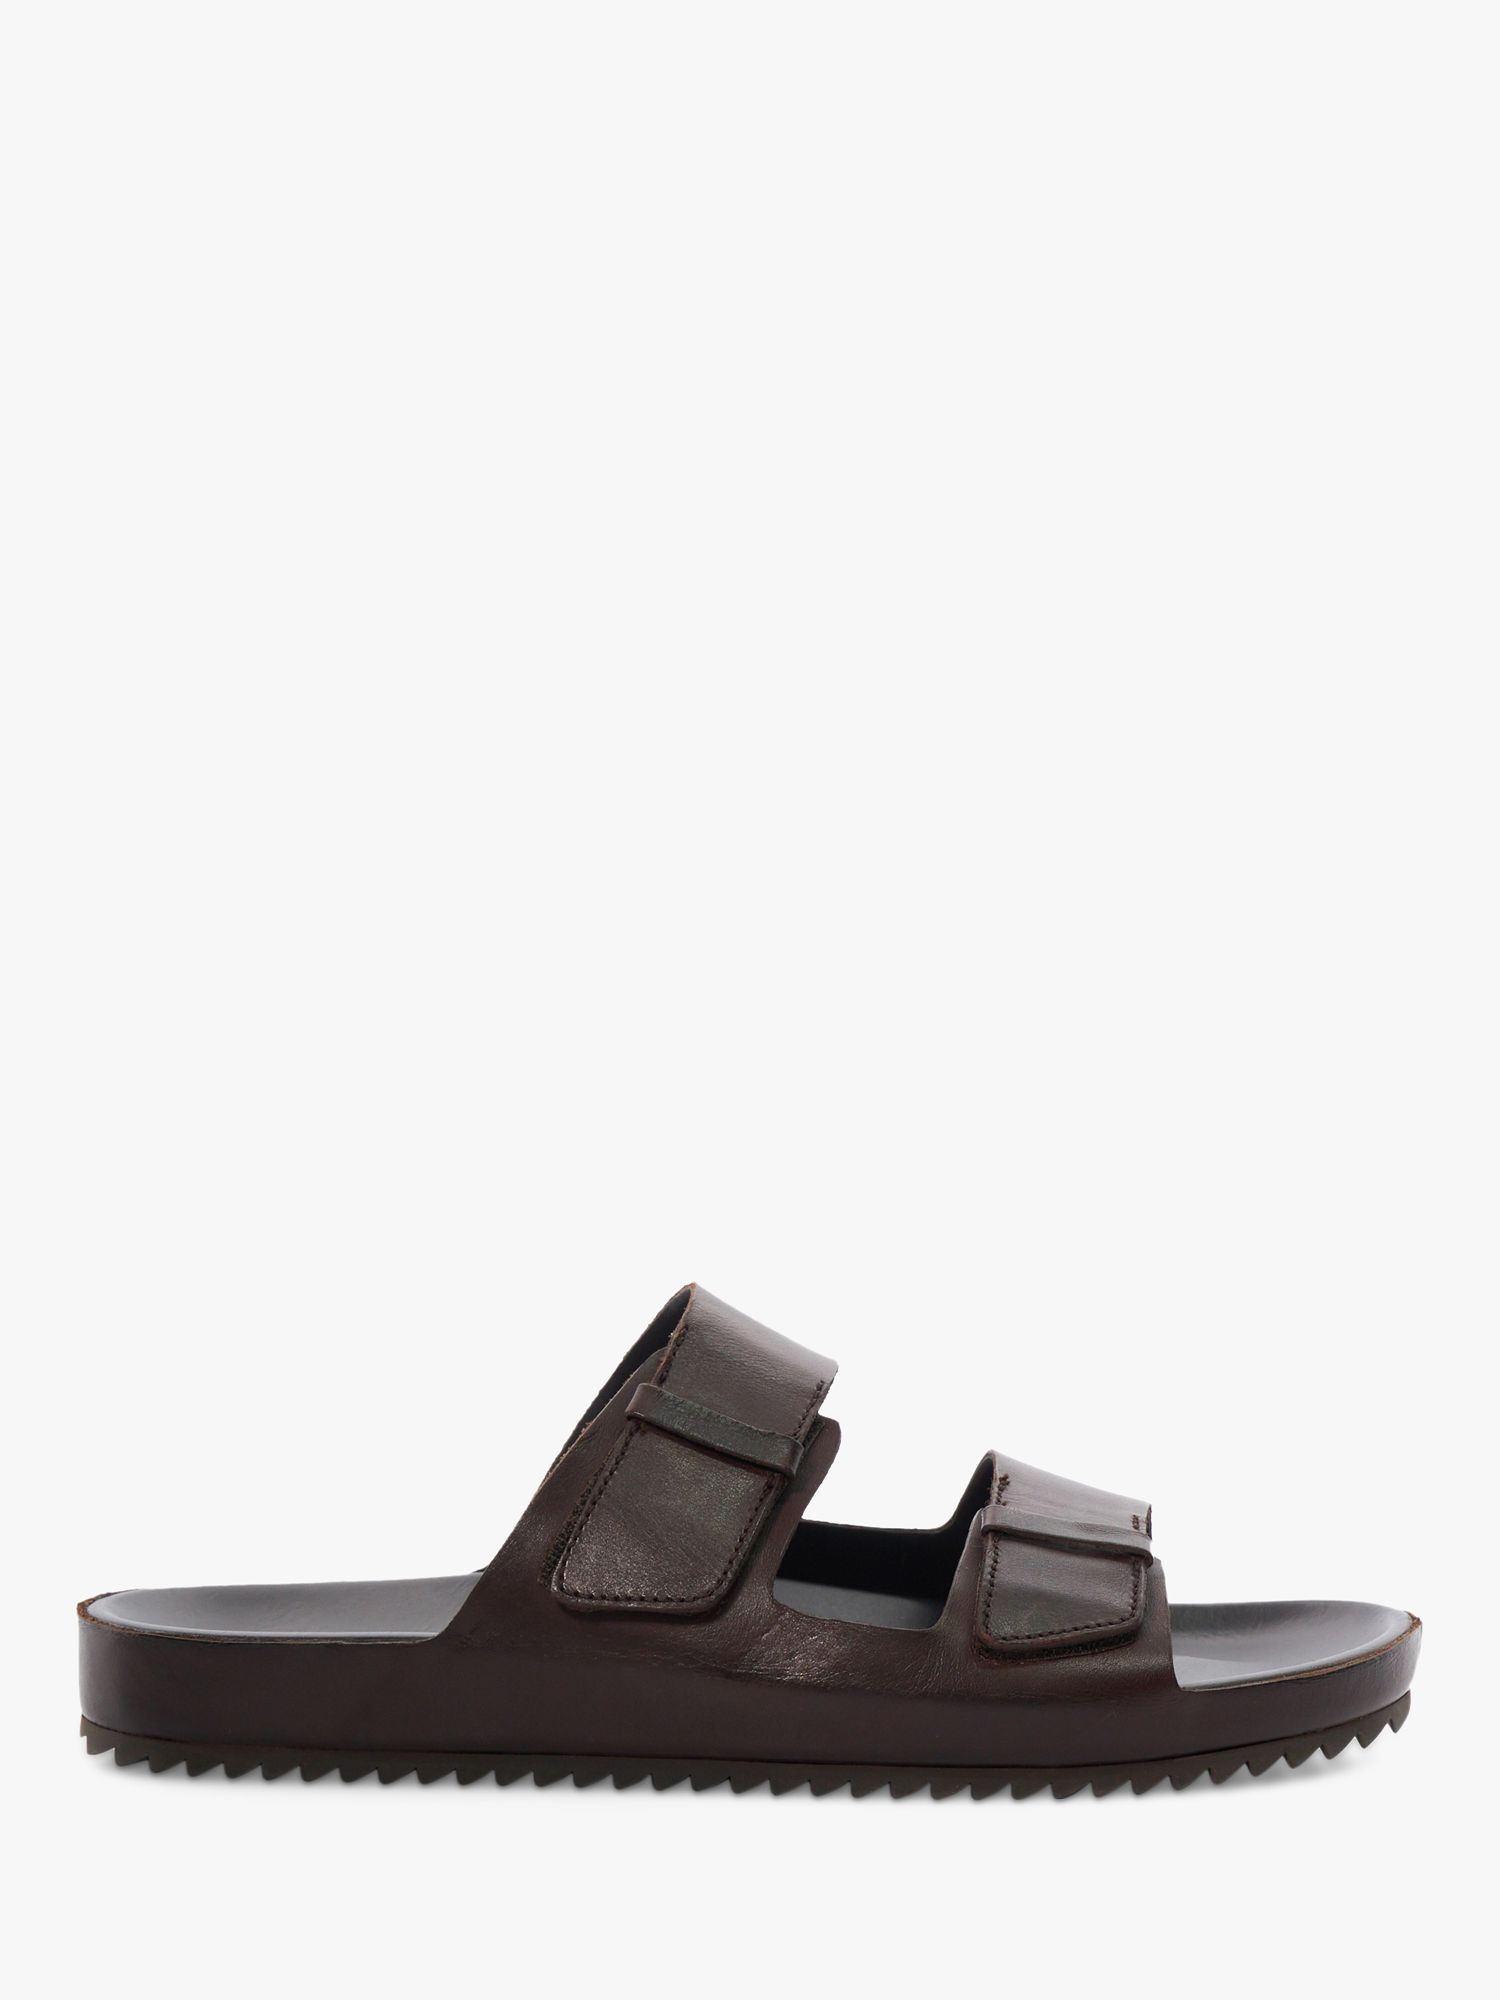 Dune Intells Leather Double Strap Sandals, Brown at John Lewis & Partners